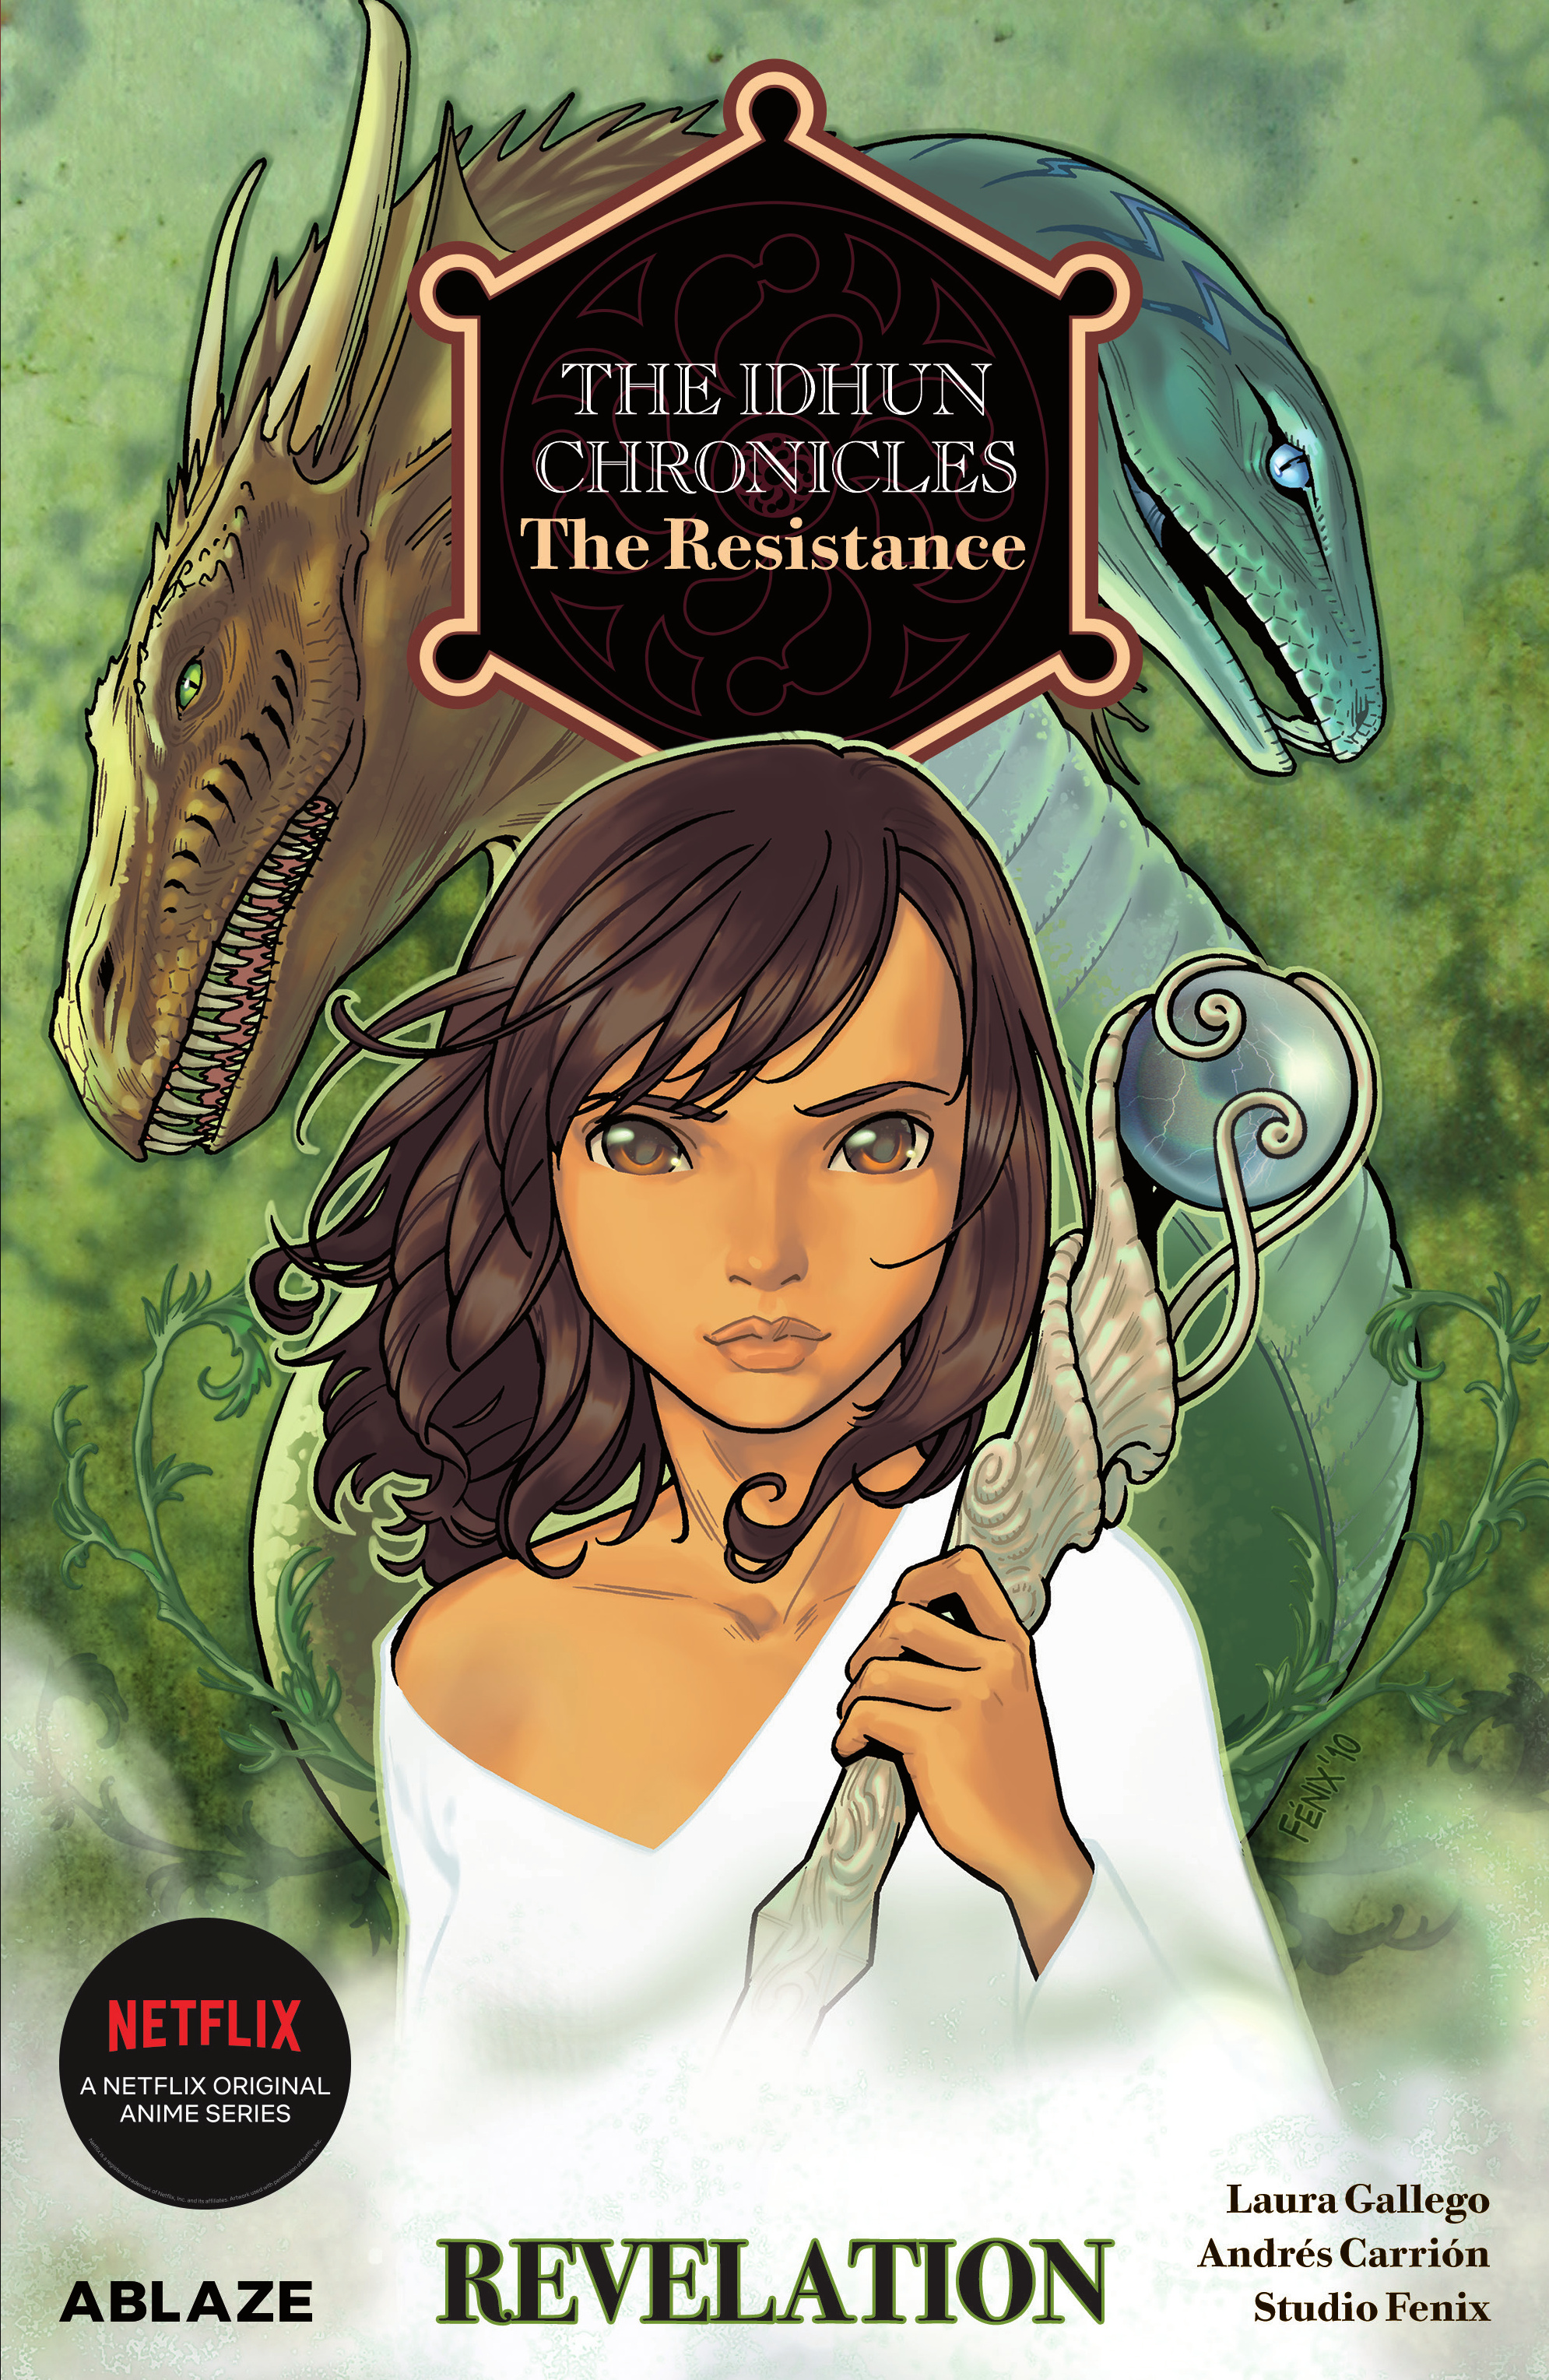 Read online The Idhun Chronicles comic -  Issue # TPB 2 - 1